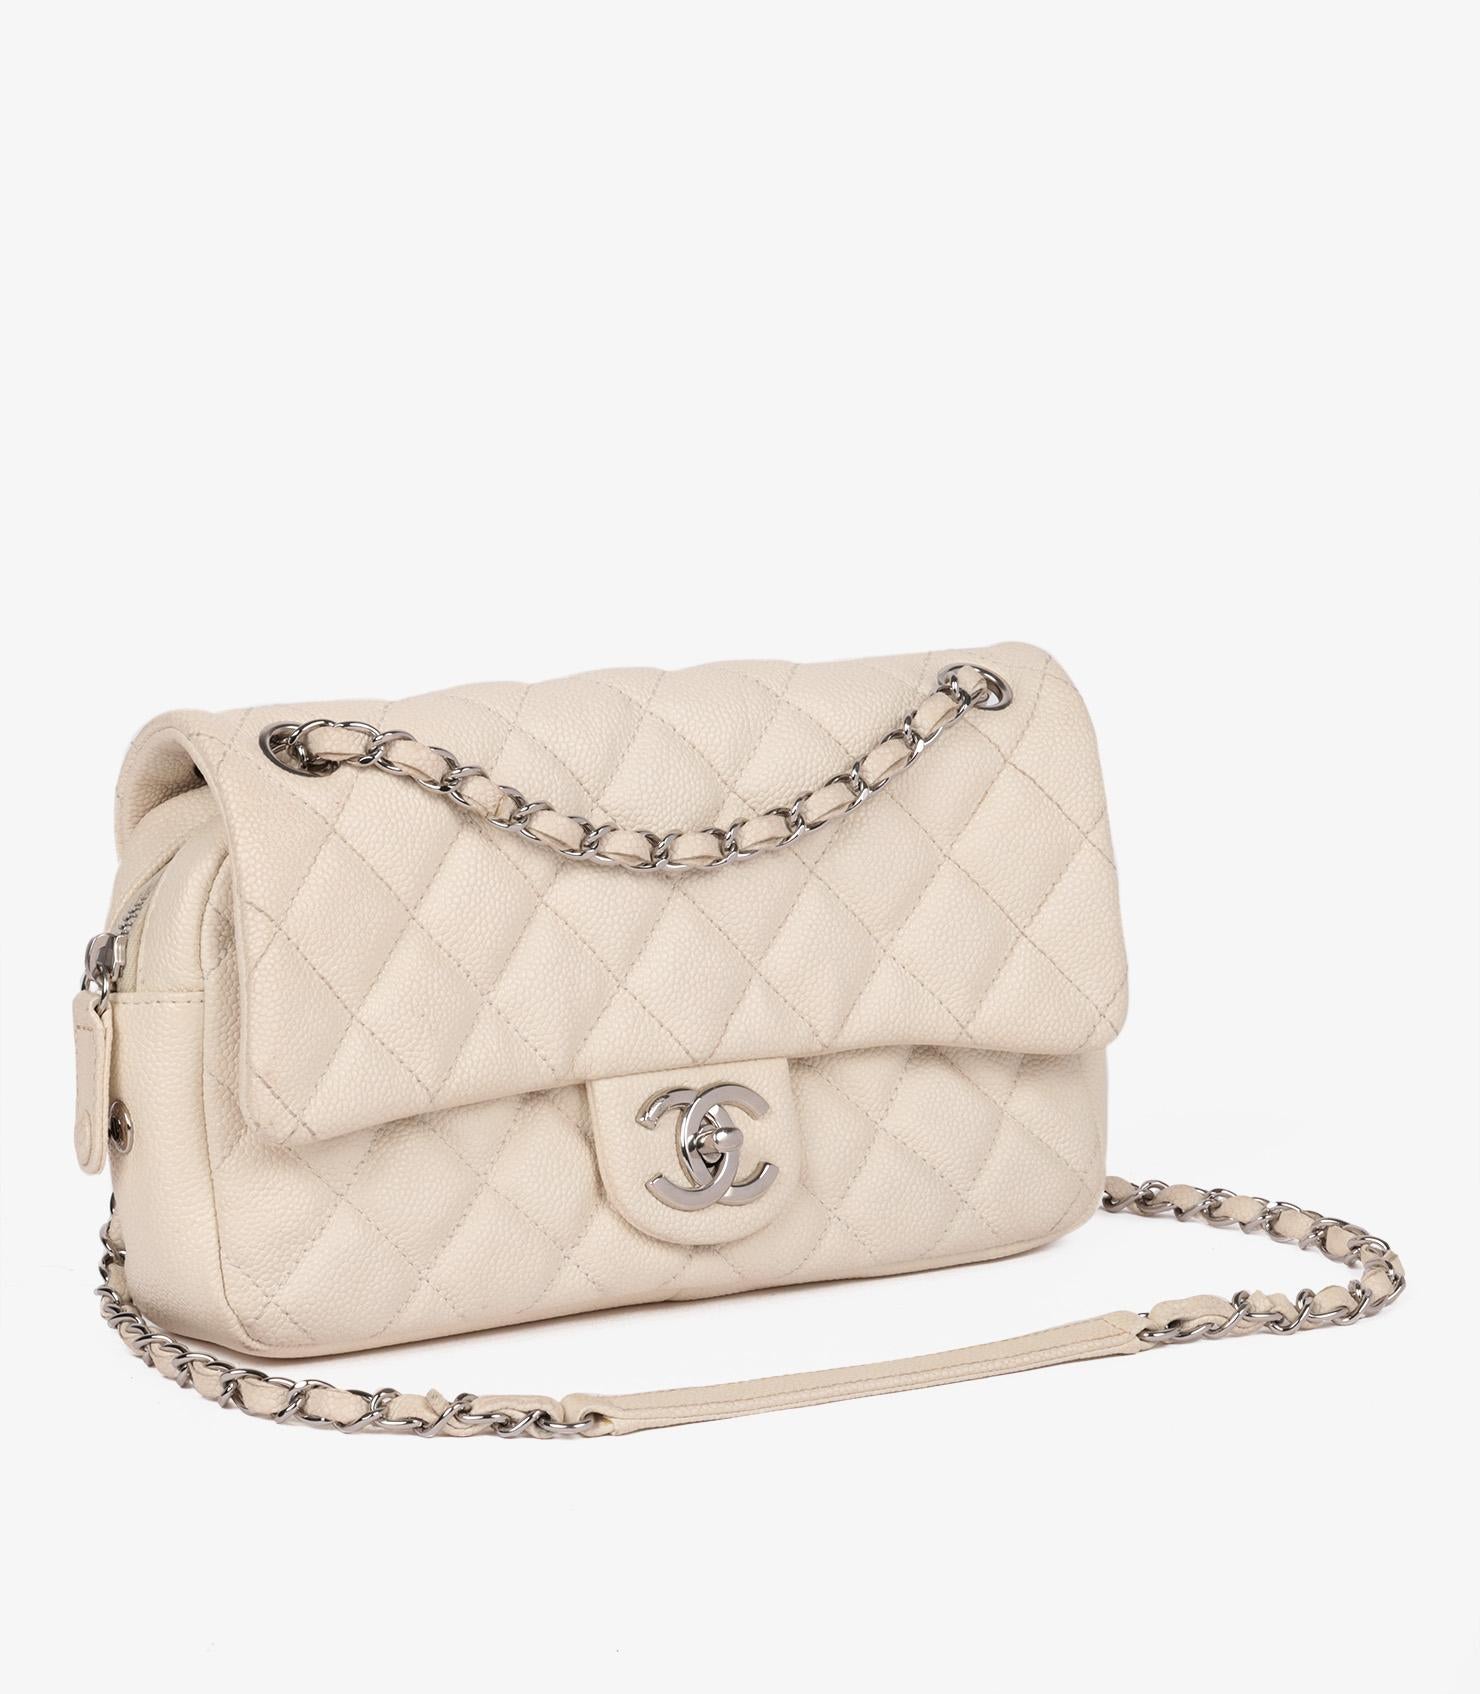 Chanel Off White Quilted Caviar Leather Medium Easy Carry Classic Flap Bag In Good Condition For Sale In Bishop's Stortford, Hertfordshire